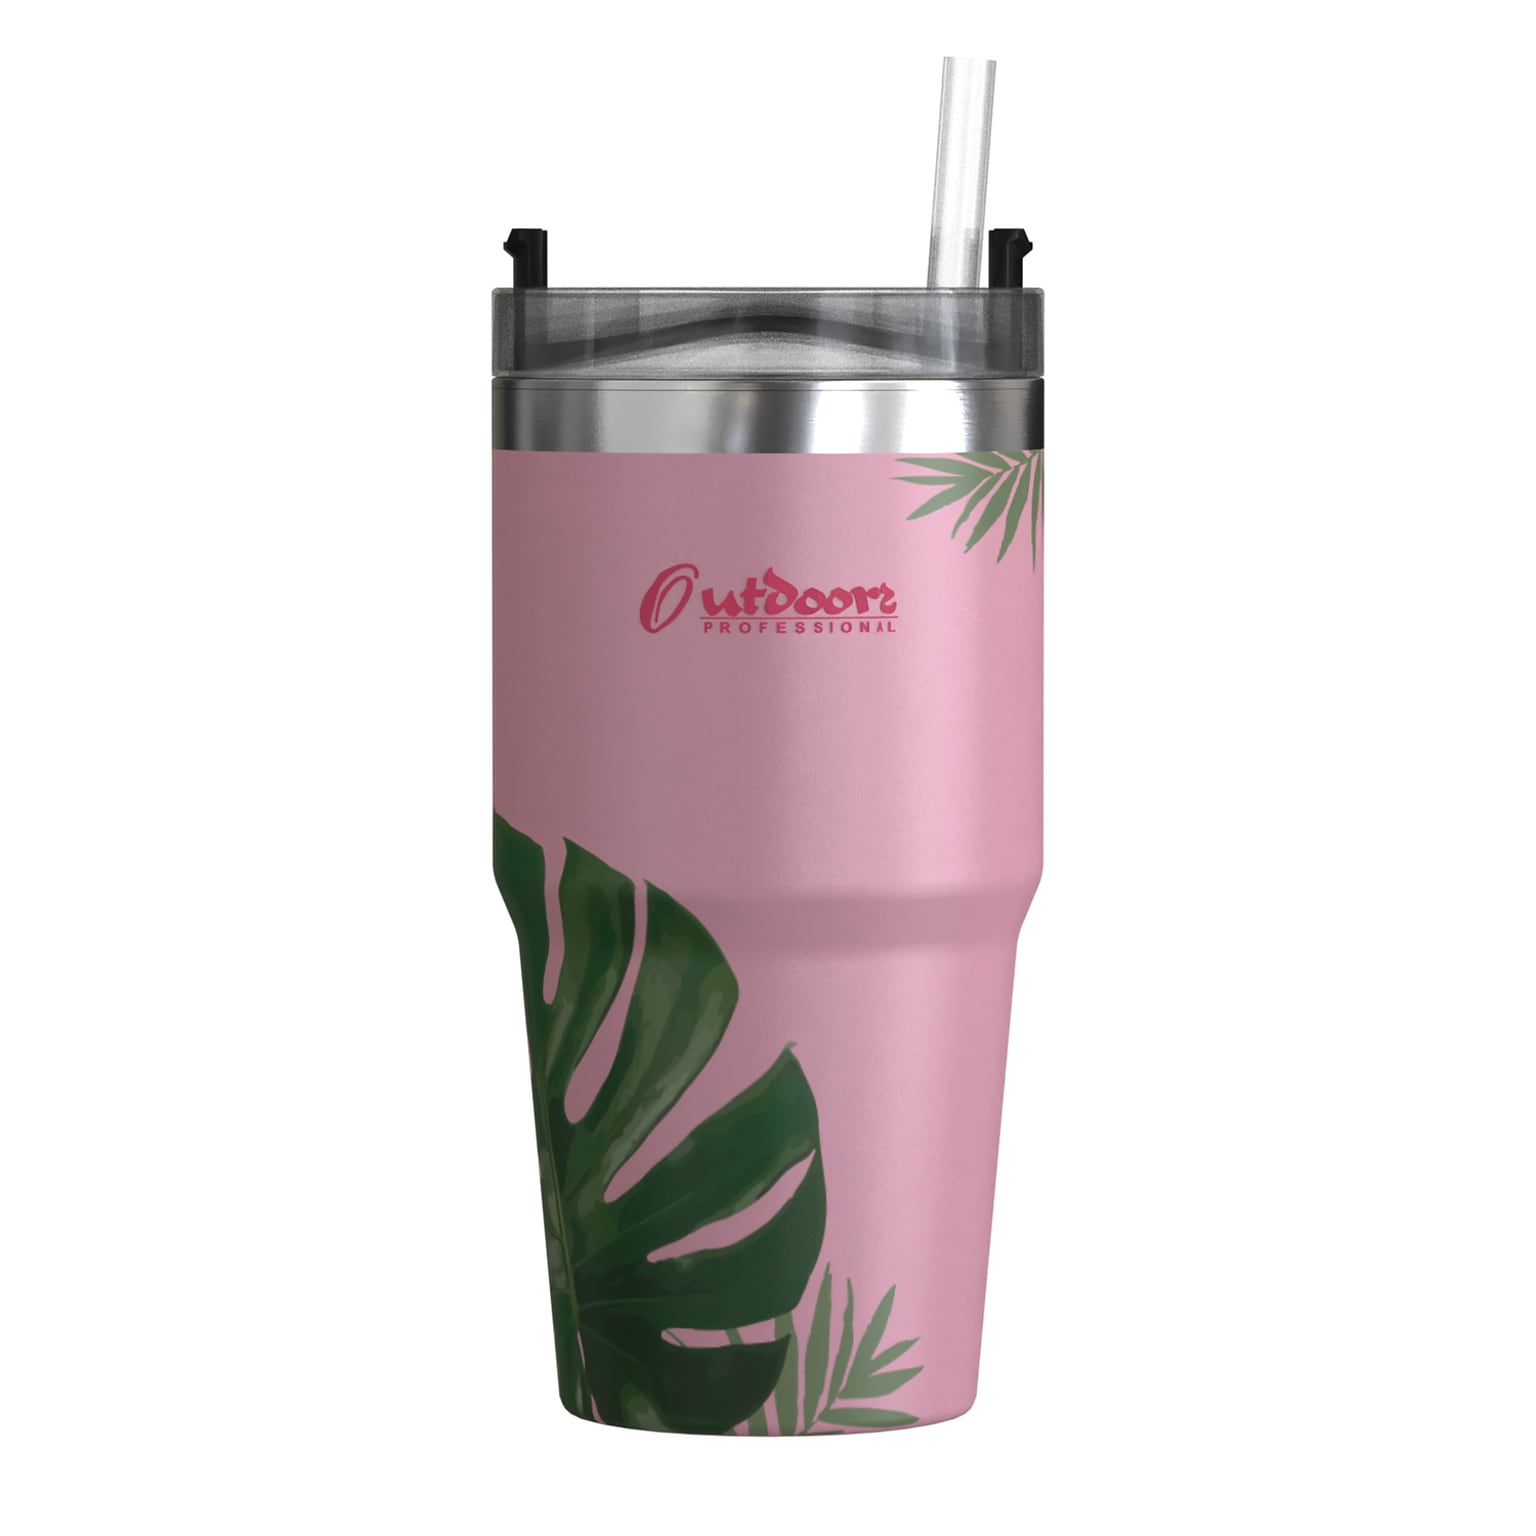 Outdoors Professional Stainless Steel Double-Walled Vacuum Insulated Tumbler with Straw, 20 oz., Tropical Pink (OUTD9201)